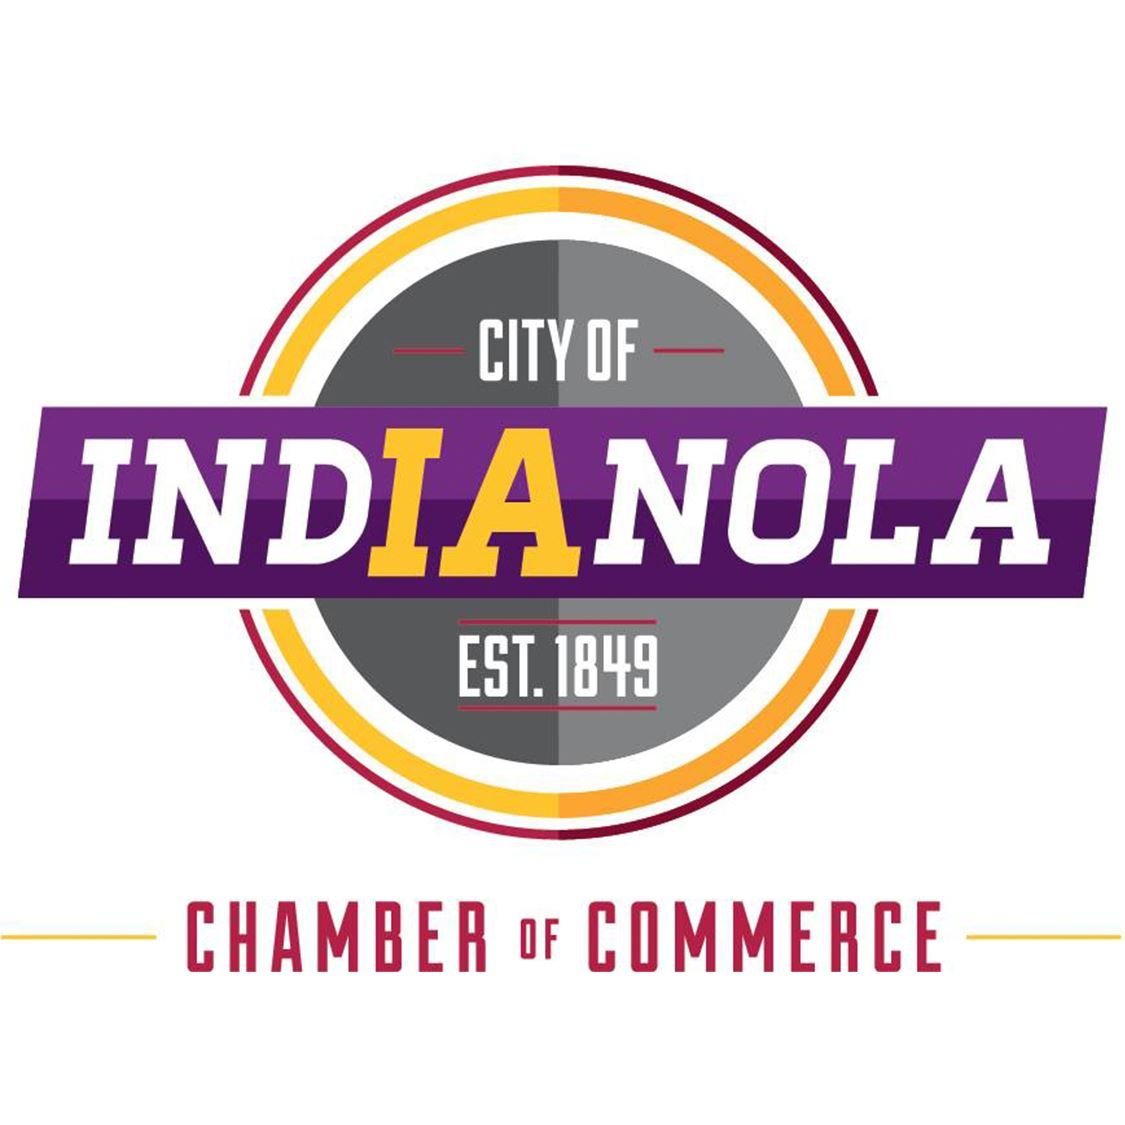 2020 Indianola Chamber of Commerce square